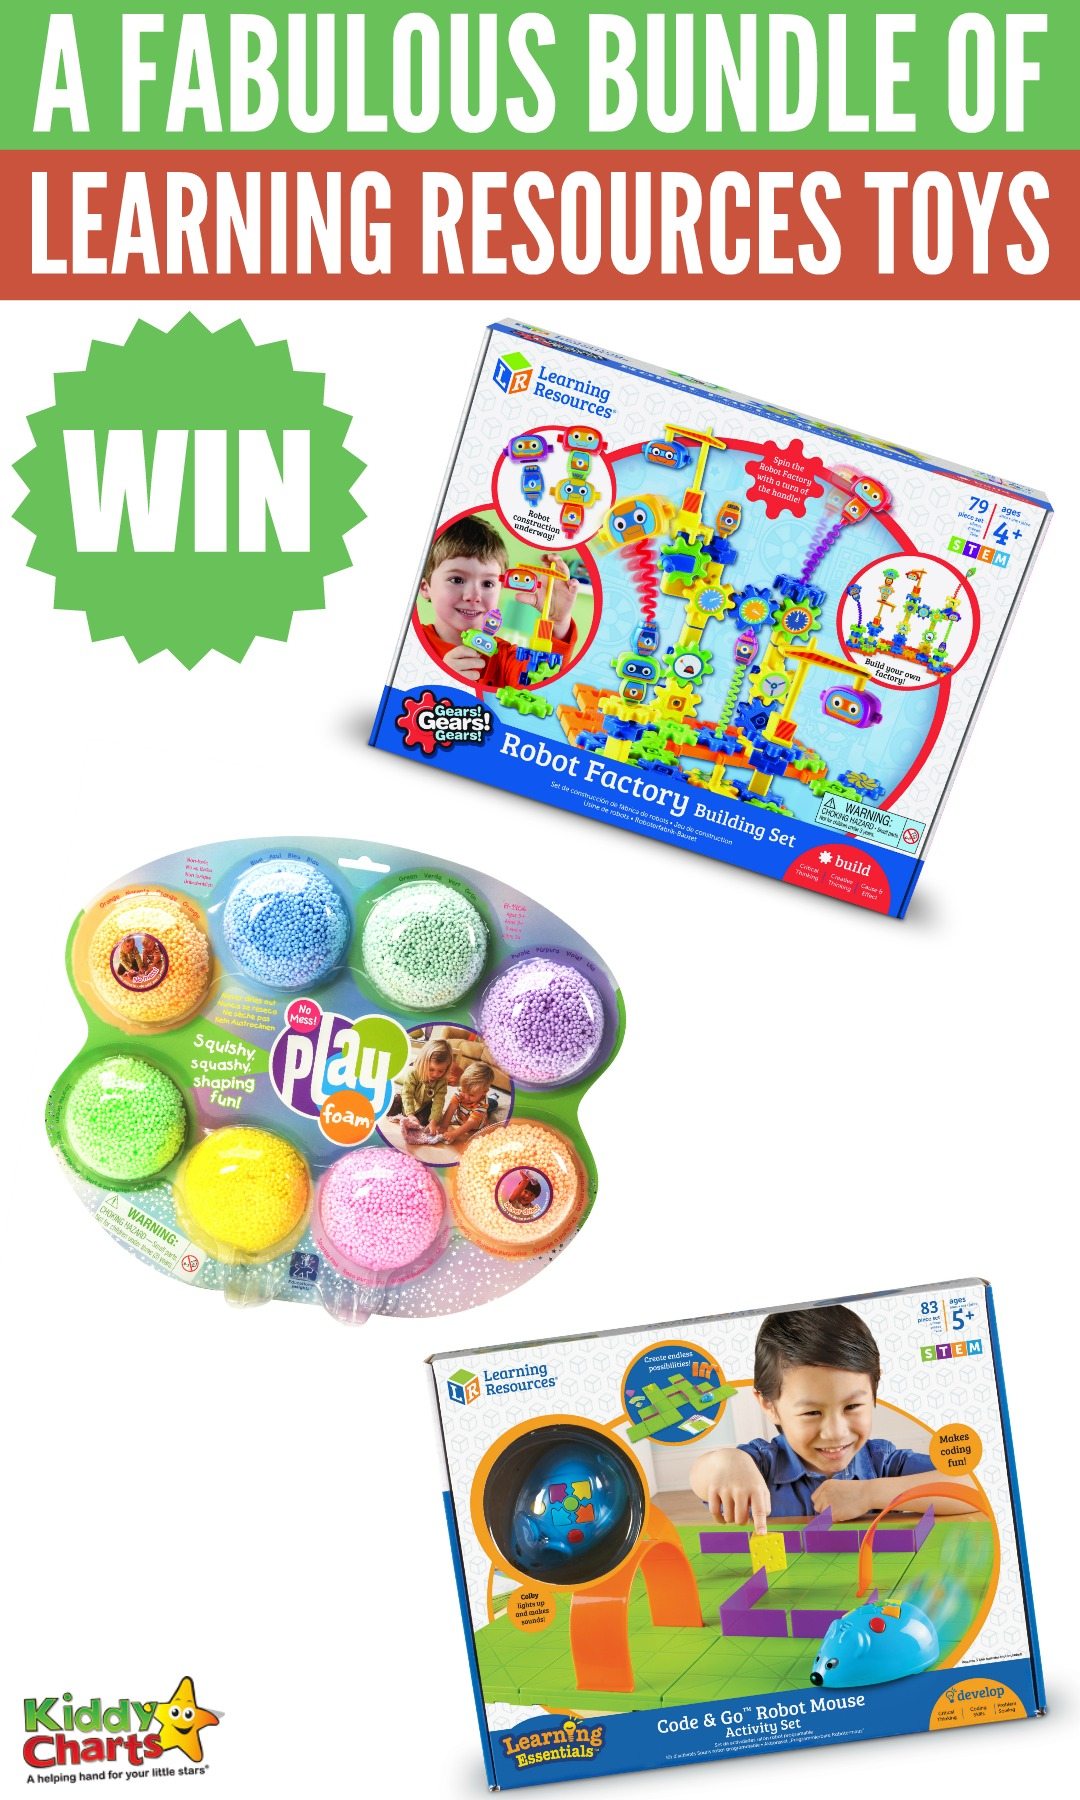 Win a fabulous bundle of Learning Resources toys #KiddyChartsAdvent #giveaways #freestuff 